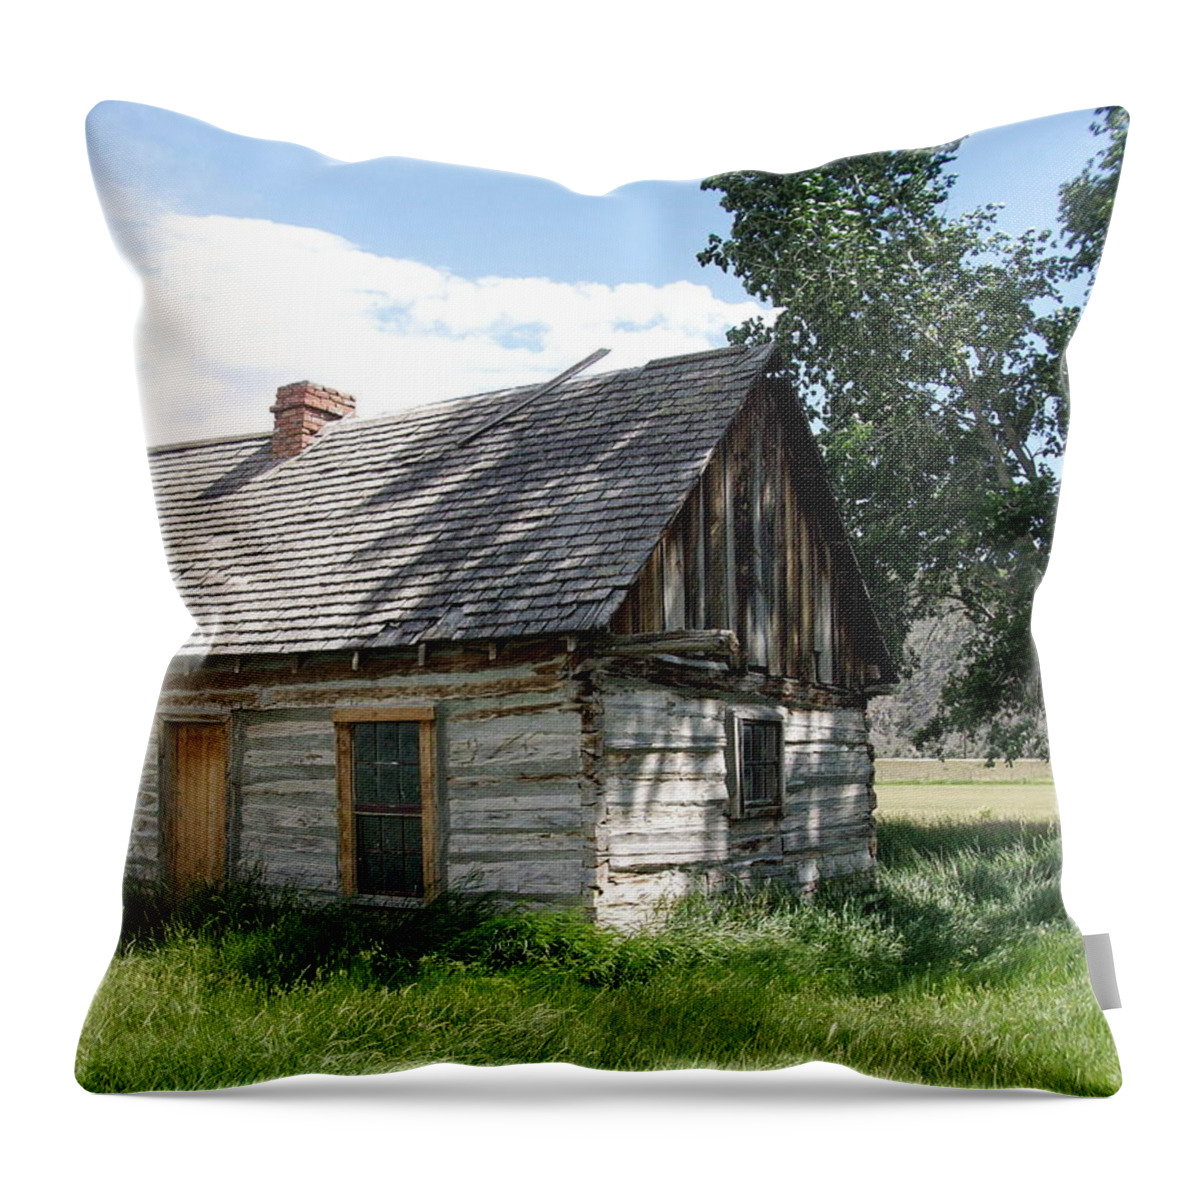 Butch Cassidy Childhood Home Throw Pillow featuring the photograph Butch Cassidy Childhood Home by Donna Jackson